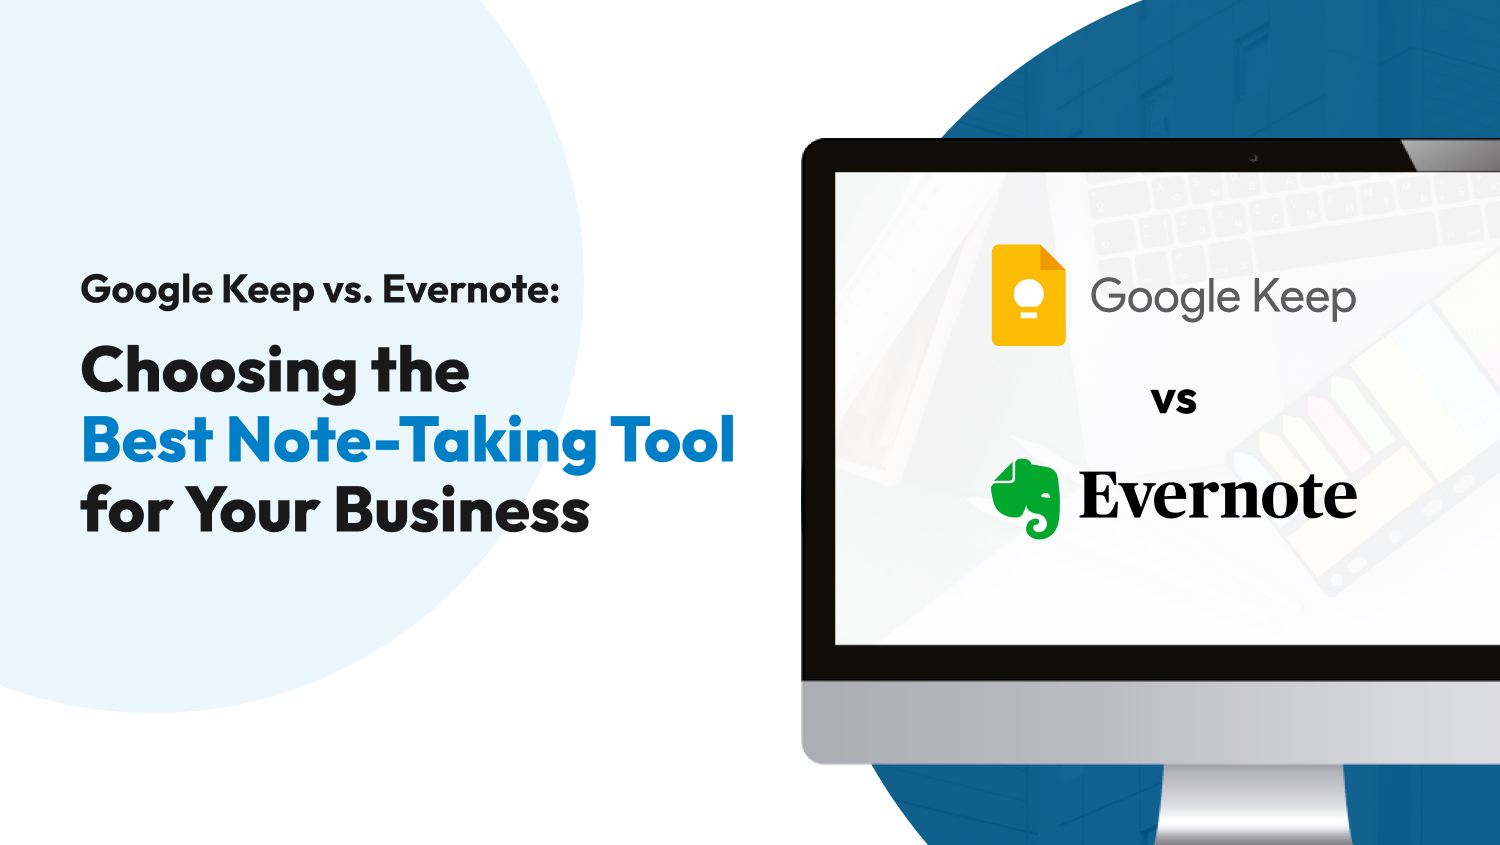 Google Keep vs. Evernote: Choosing the Best Note-Taking Tool for Your Business